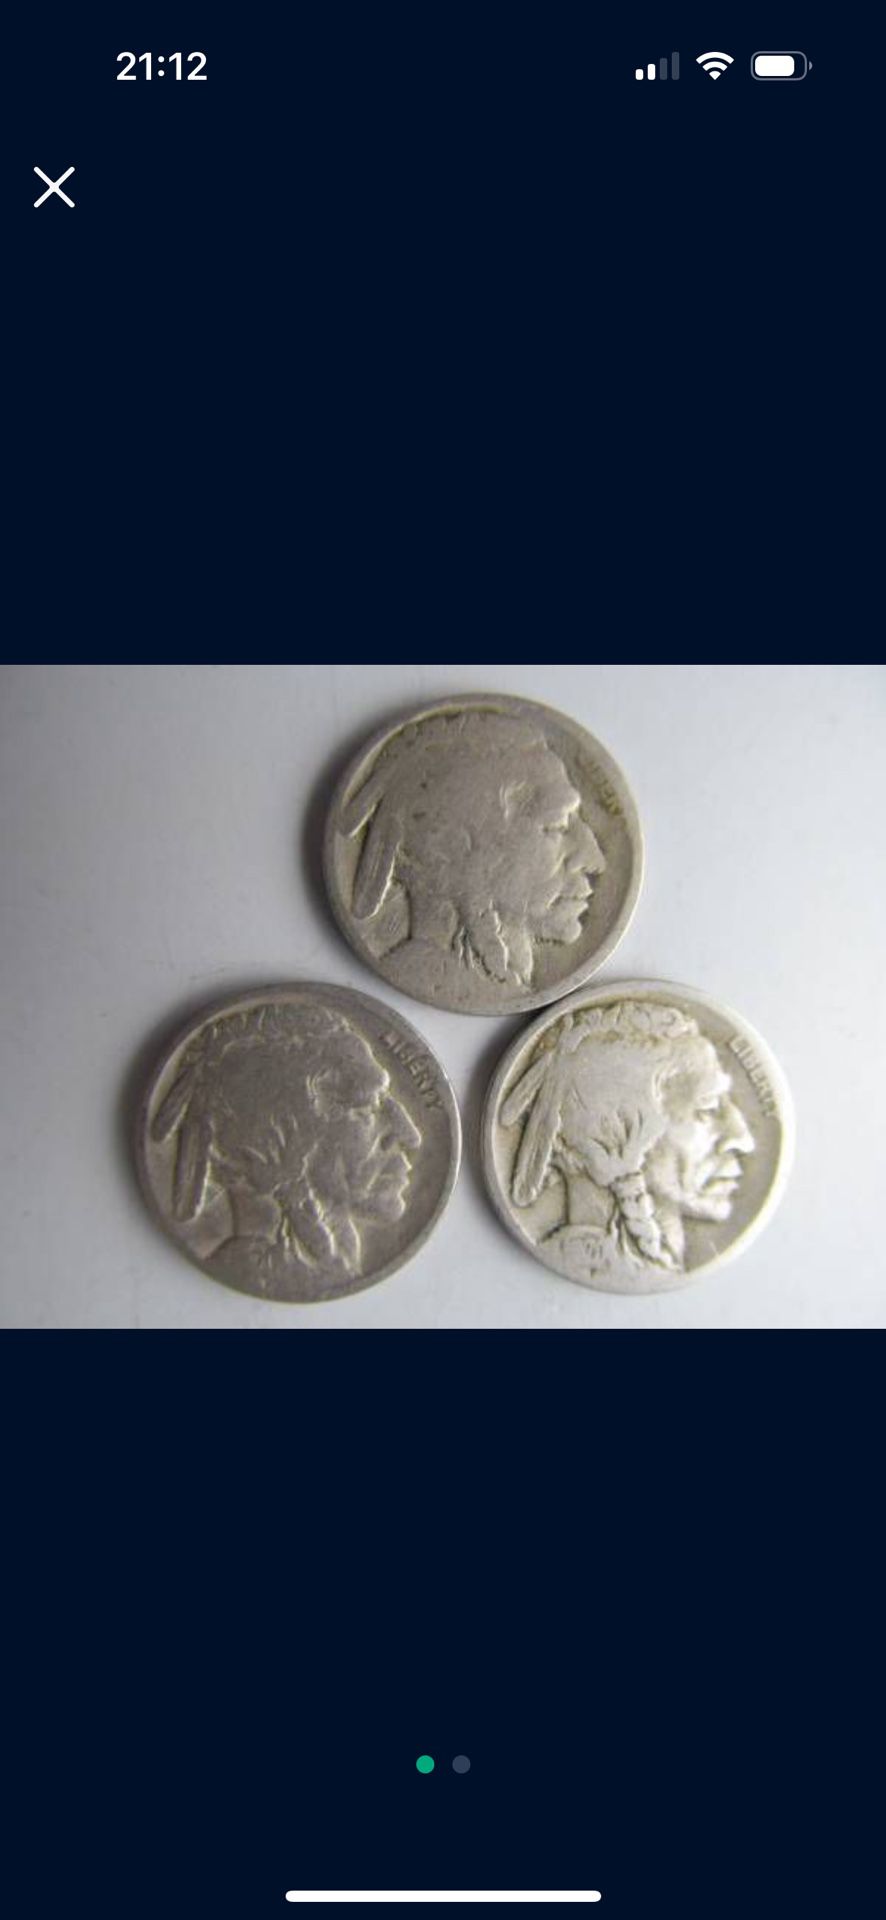 Set of all Three 1920 Buffalo Nickels -- INCLUDES BIG KEY DATE COINS!